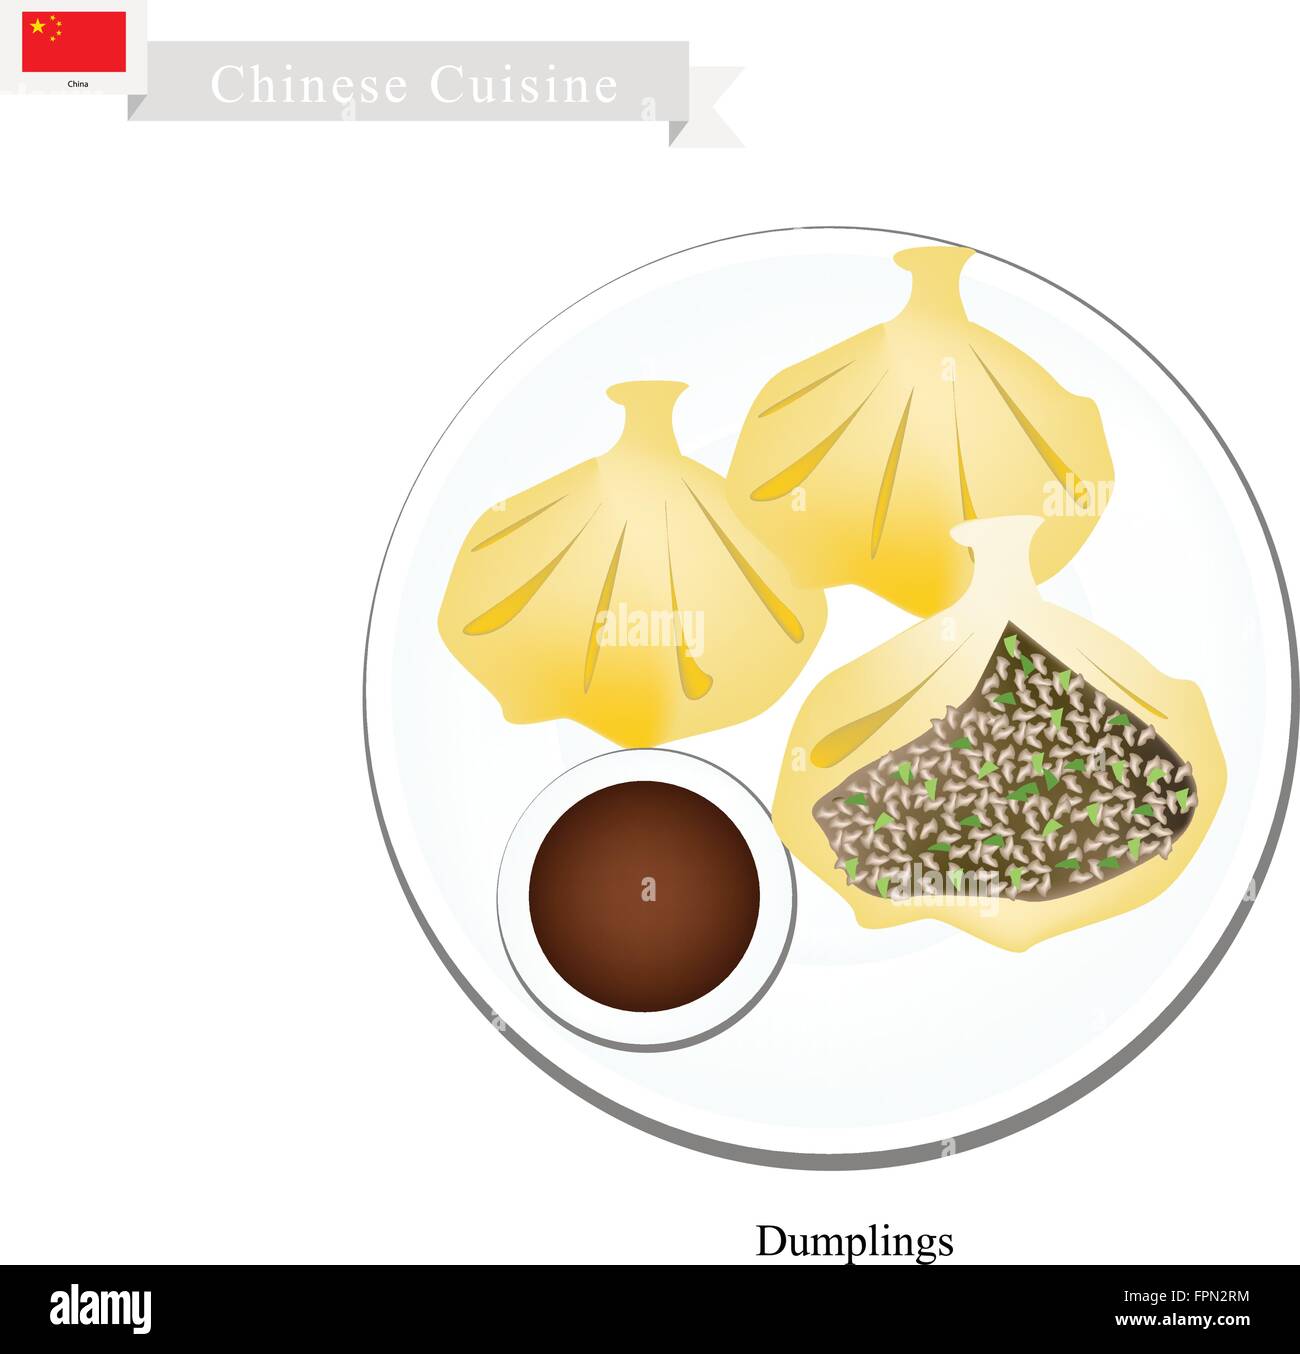 Chinese Cuisine, Illustration of Xiao Long Bao or Chinese Steamed Soup Dumplings. One of Most Popular Dumplings in China. Stock Vector